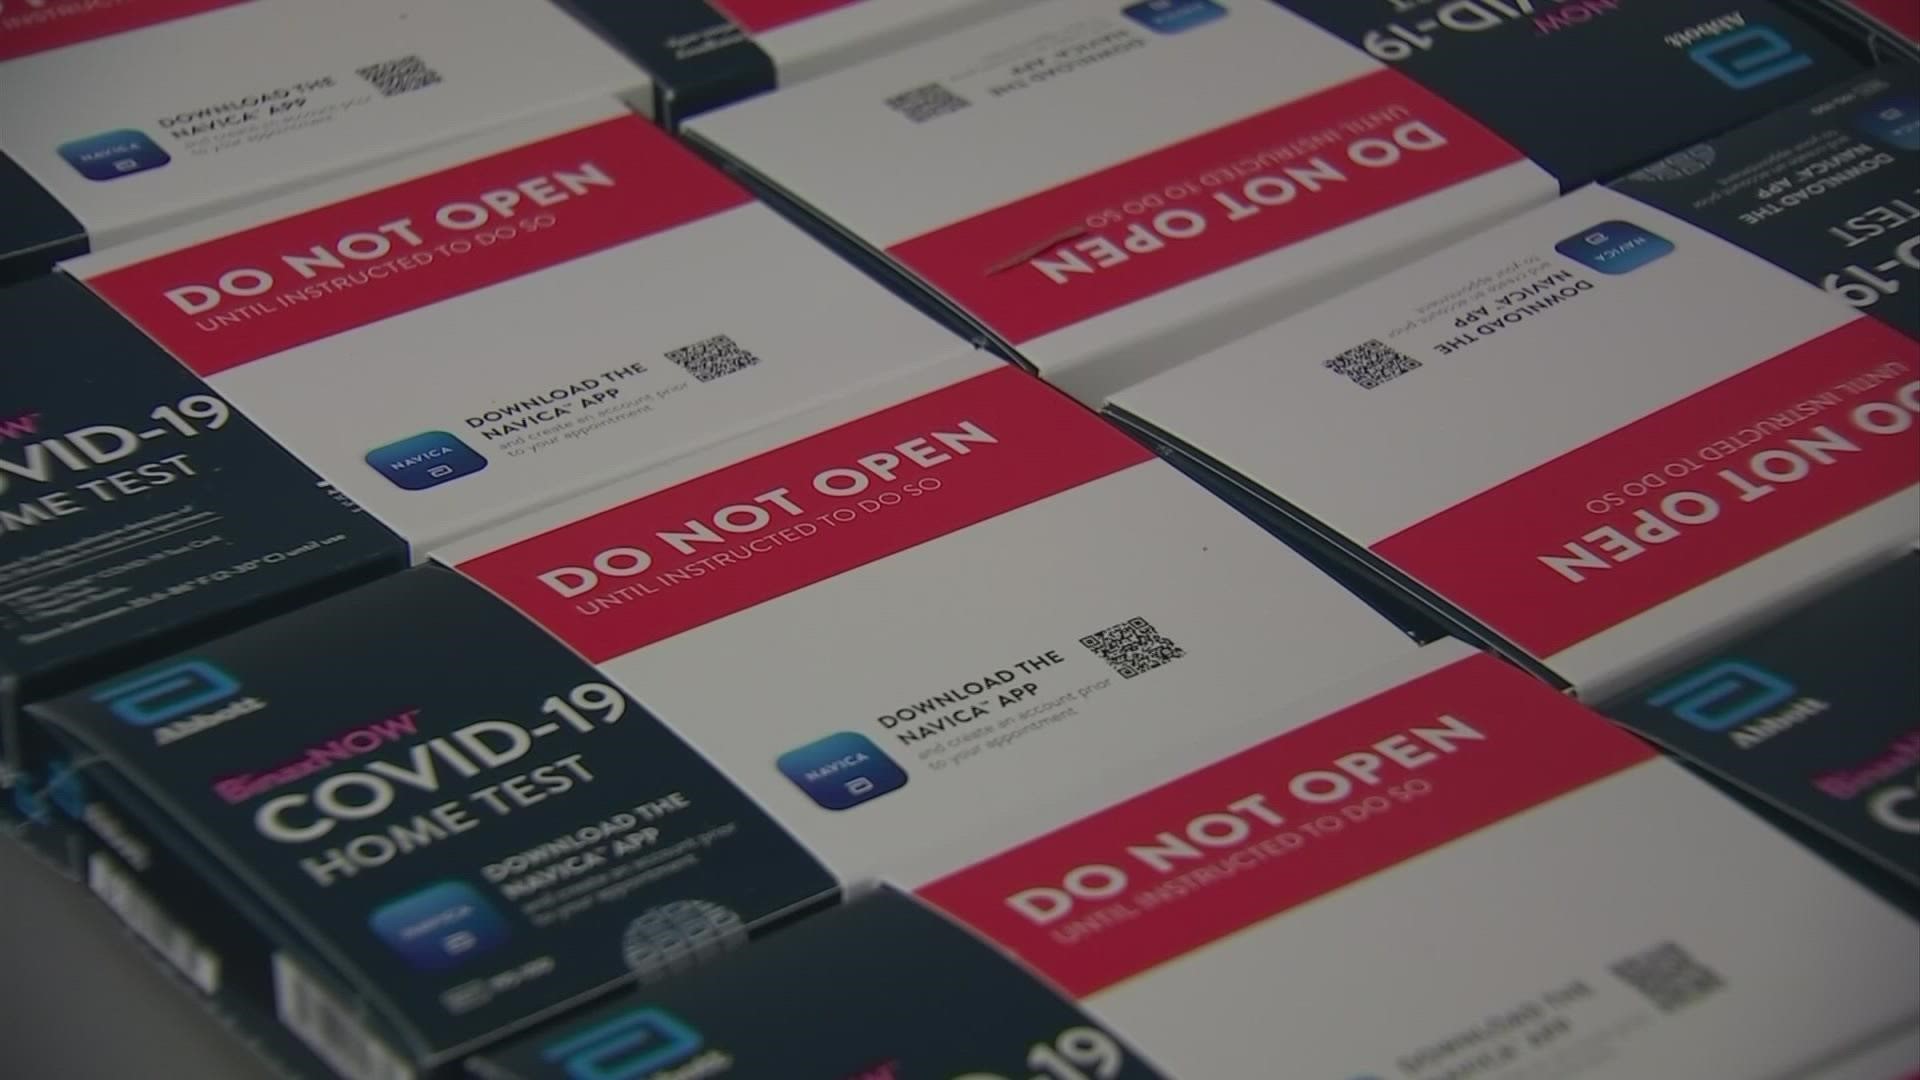 Starting this weekend, people won't have to pay for at-home COVID-19 tests if they have private insurance.